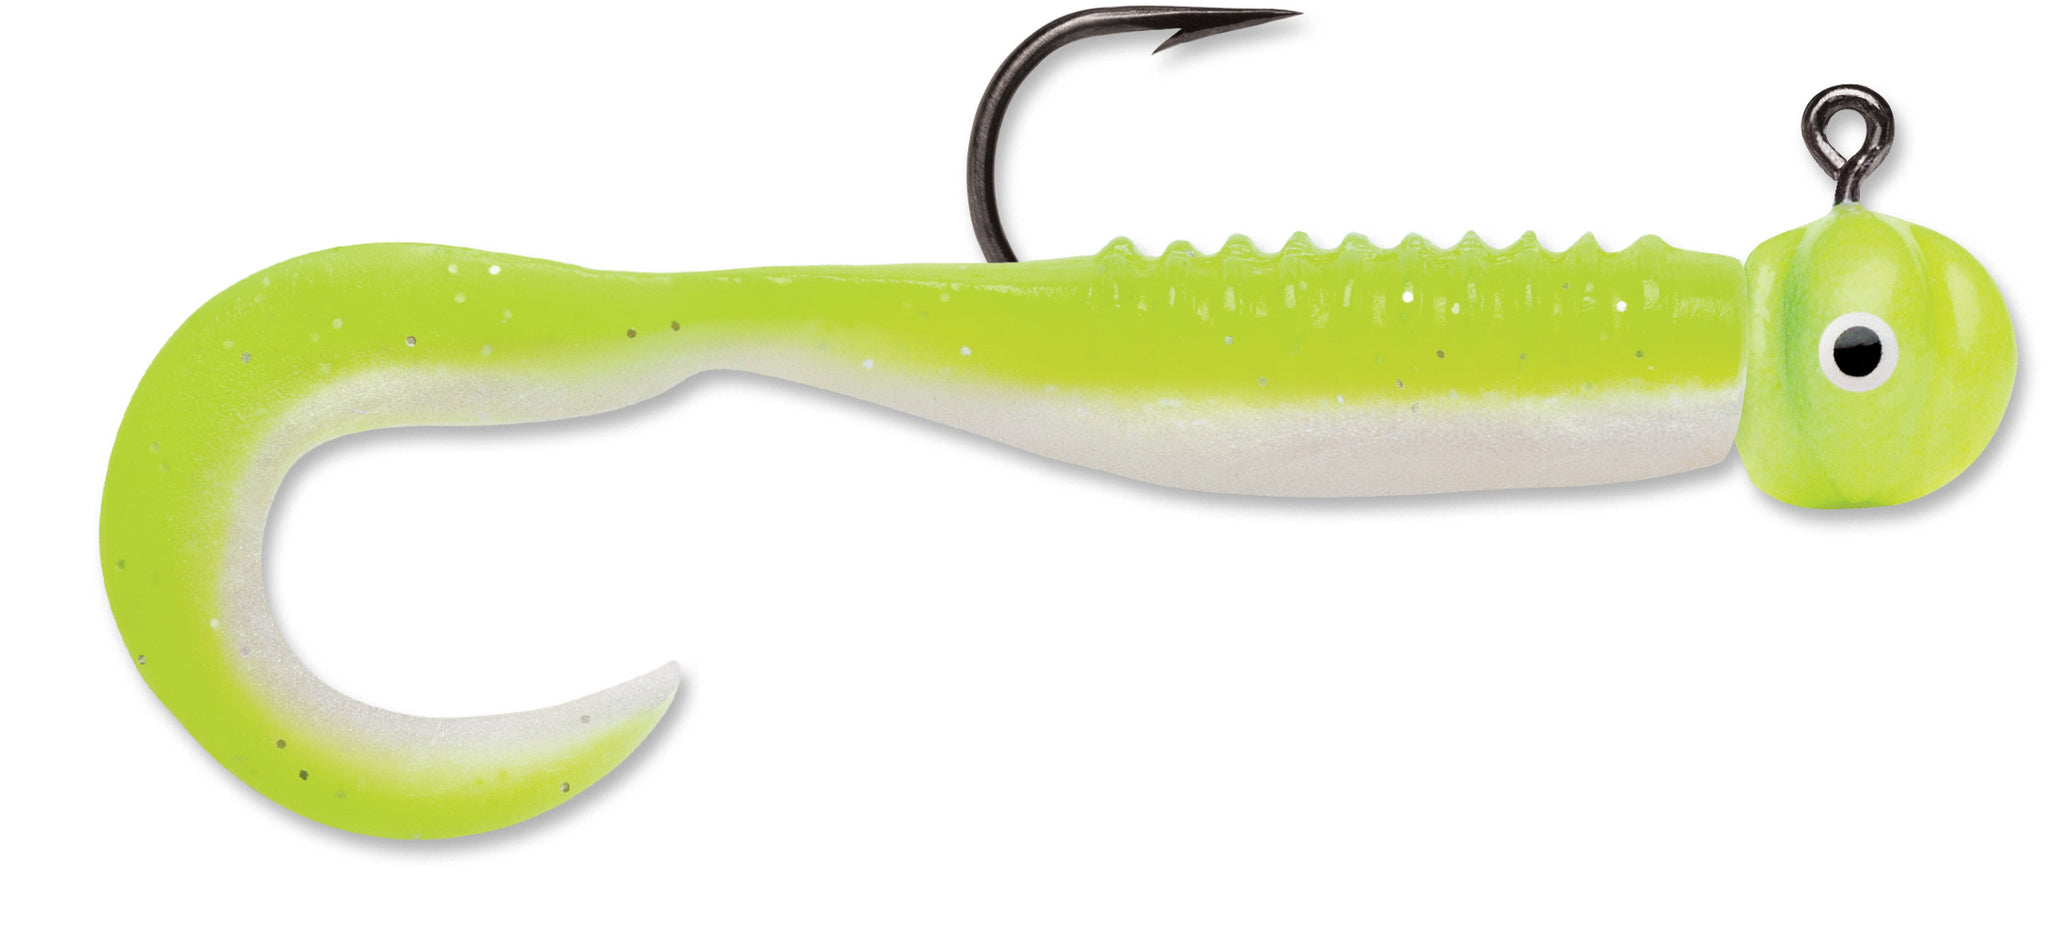 Vmc Curl Tail Jig 2 Pack Discount Tackle